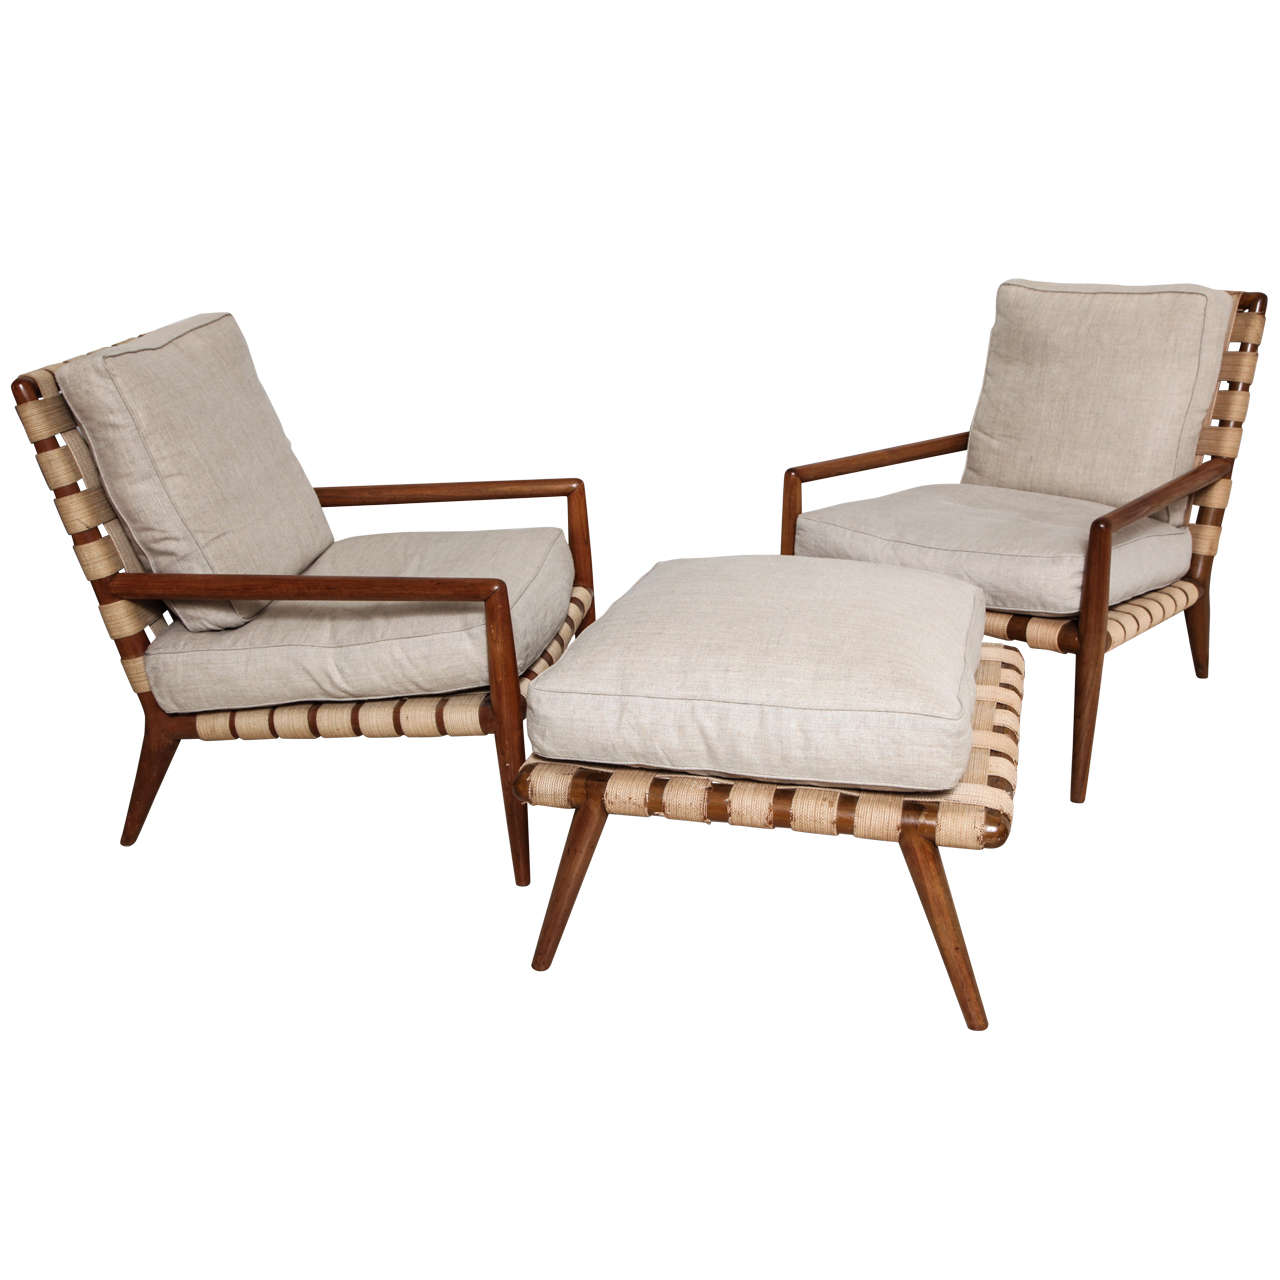 Pair of 20th C. Armchairs and Ottoman by TH Robsjohn-Gibbings